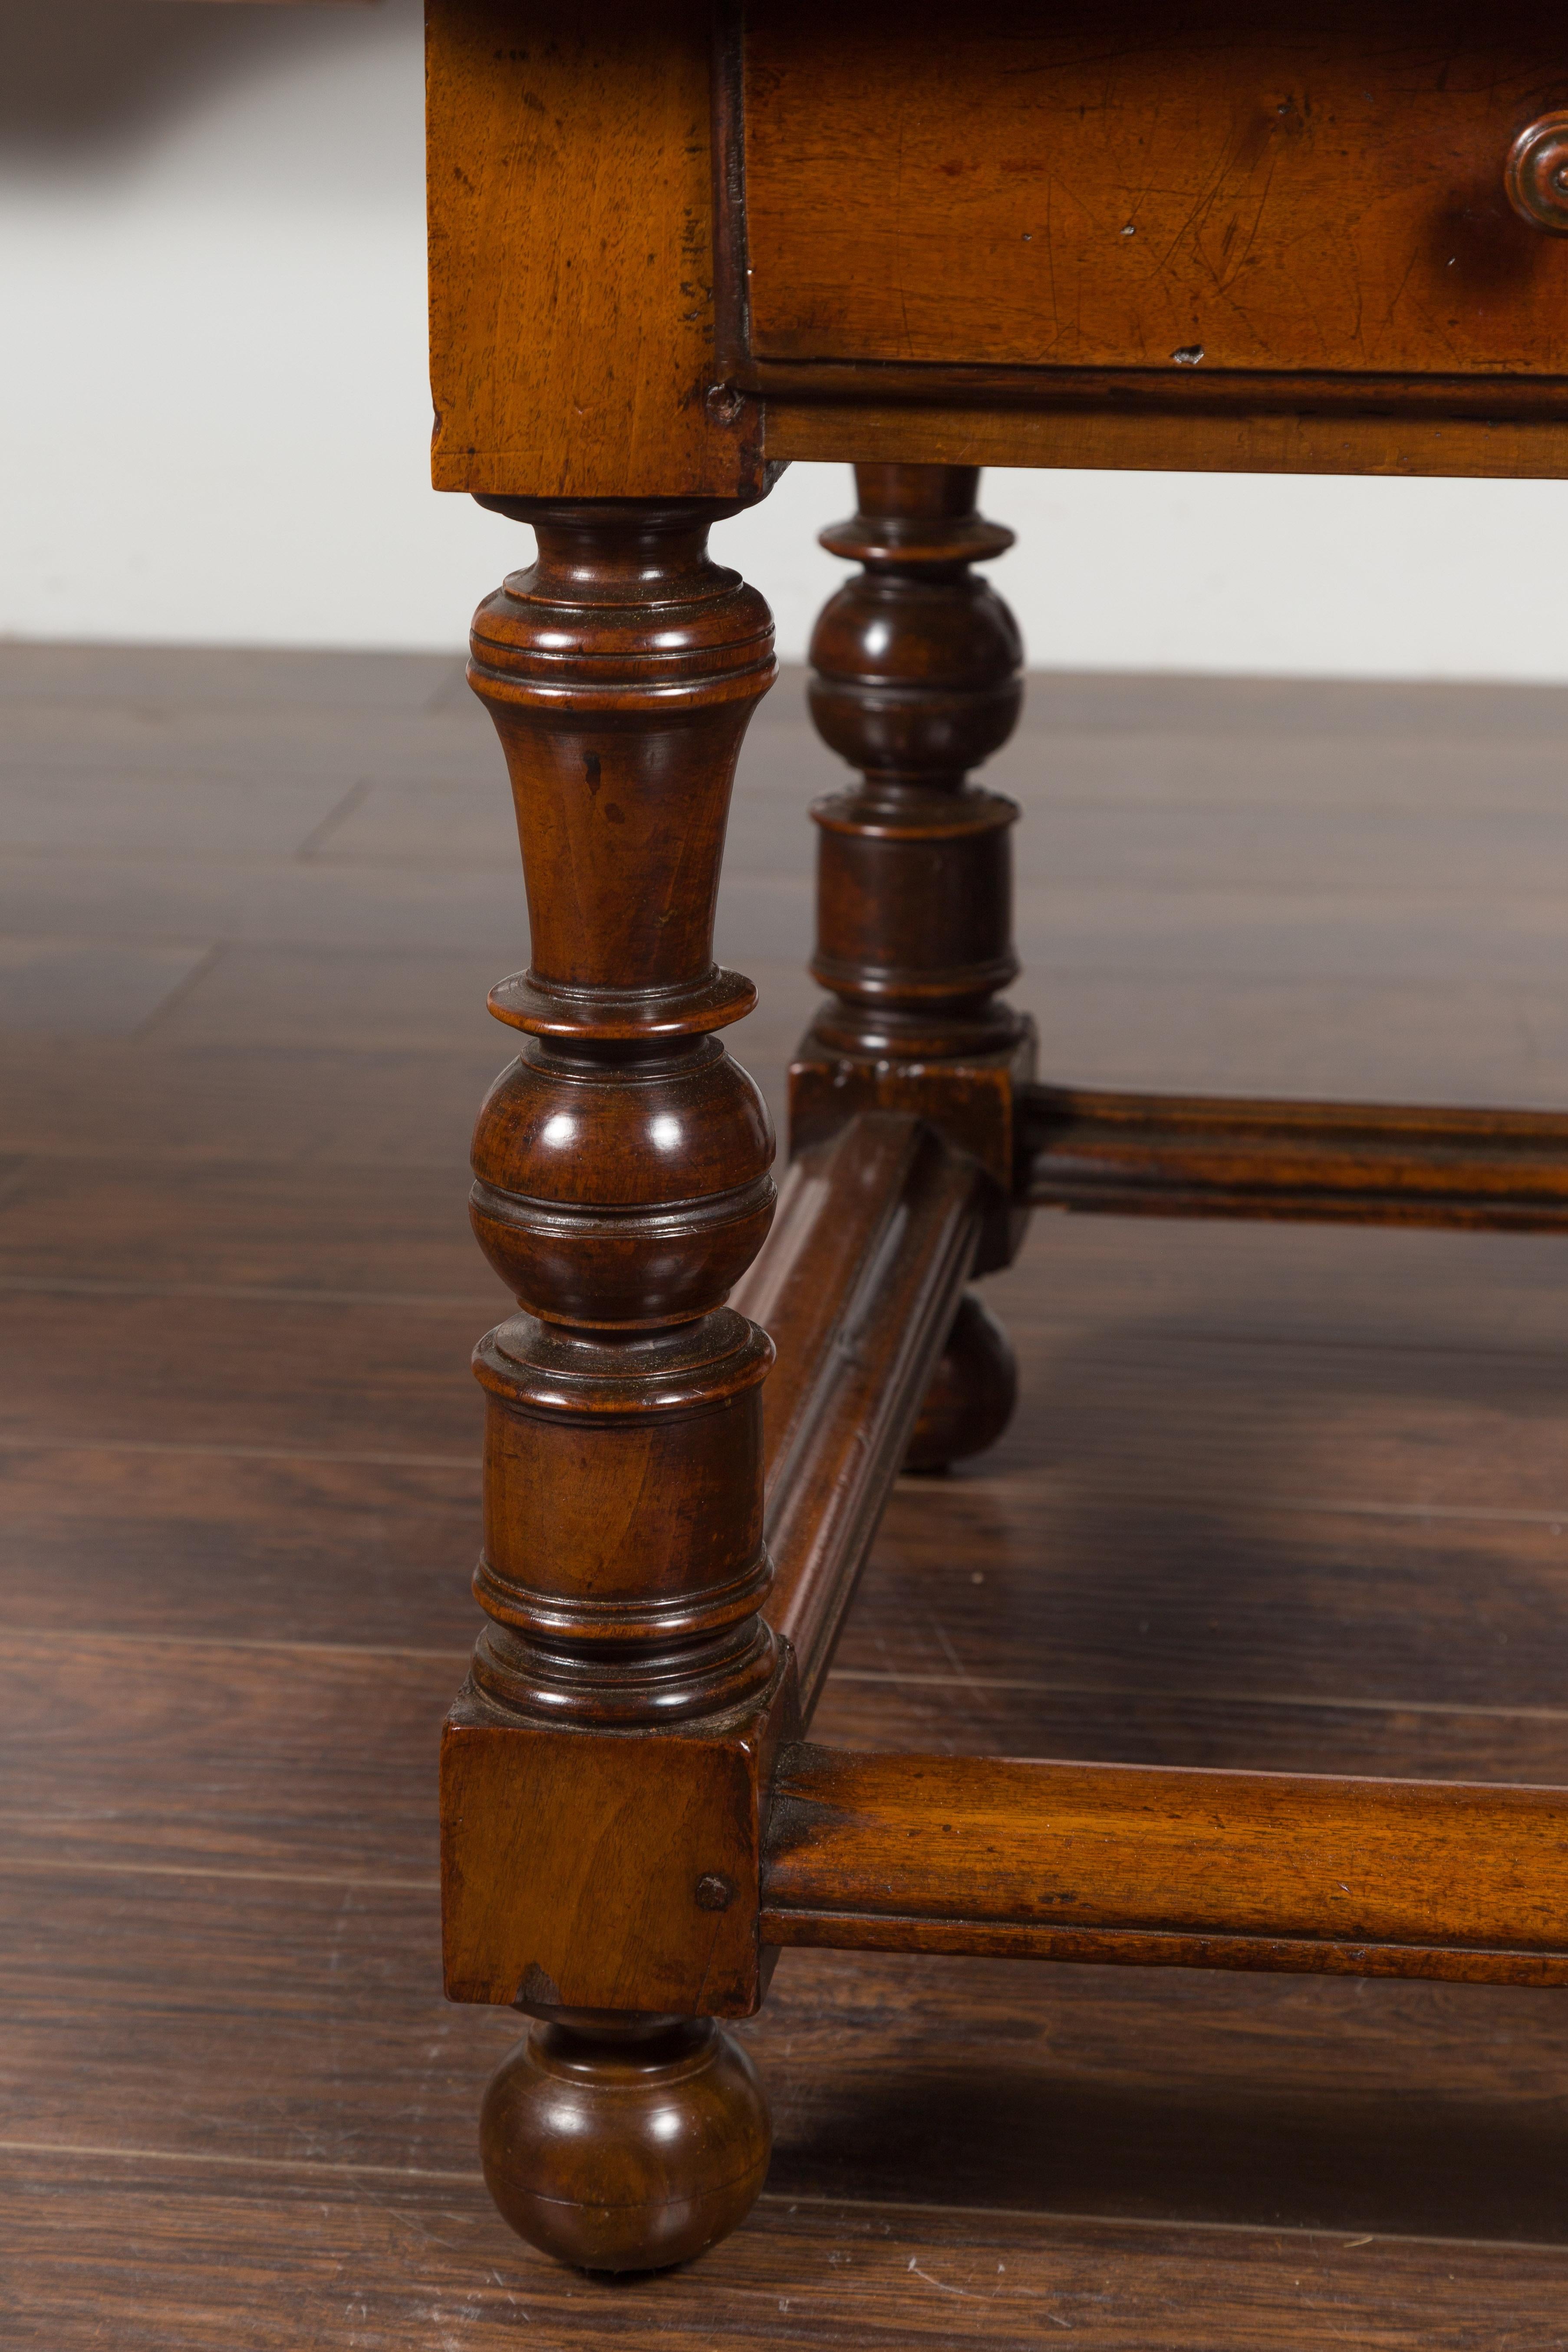 English 1850s Walnut Parquet Top Table with Single Drawer and Turned Legs For Sale 1